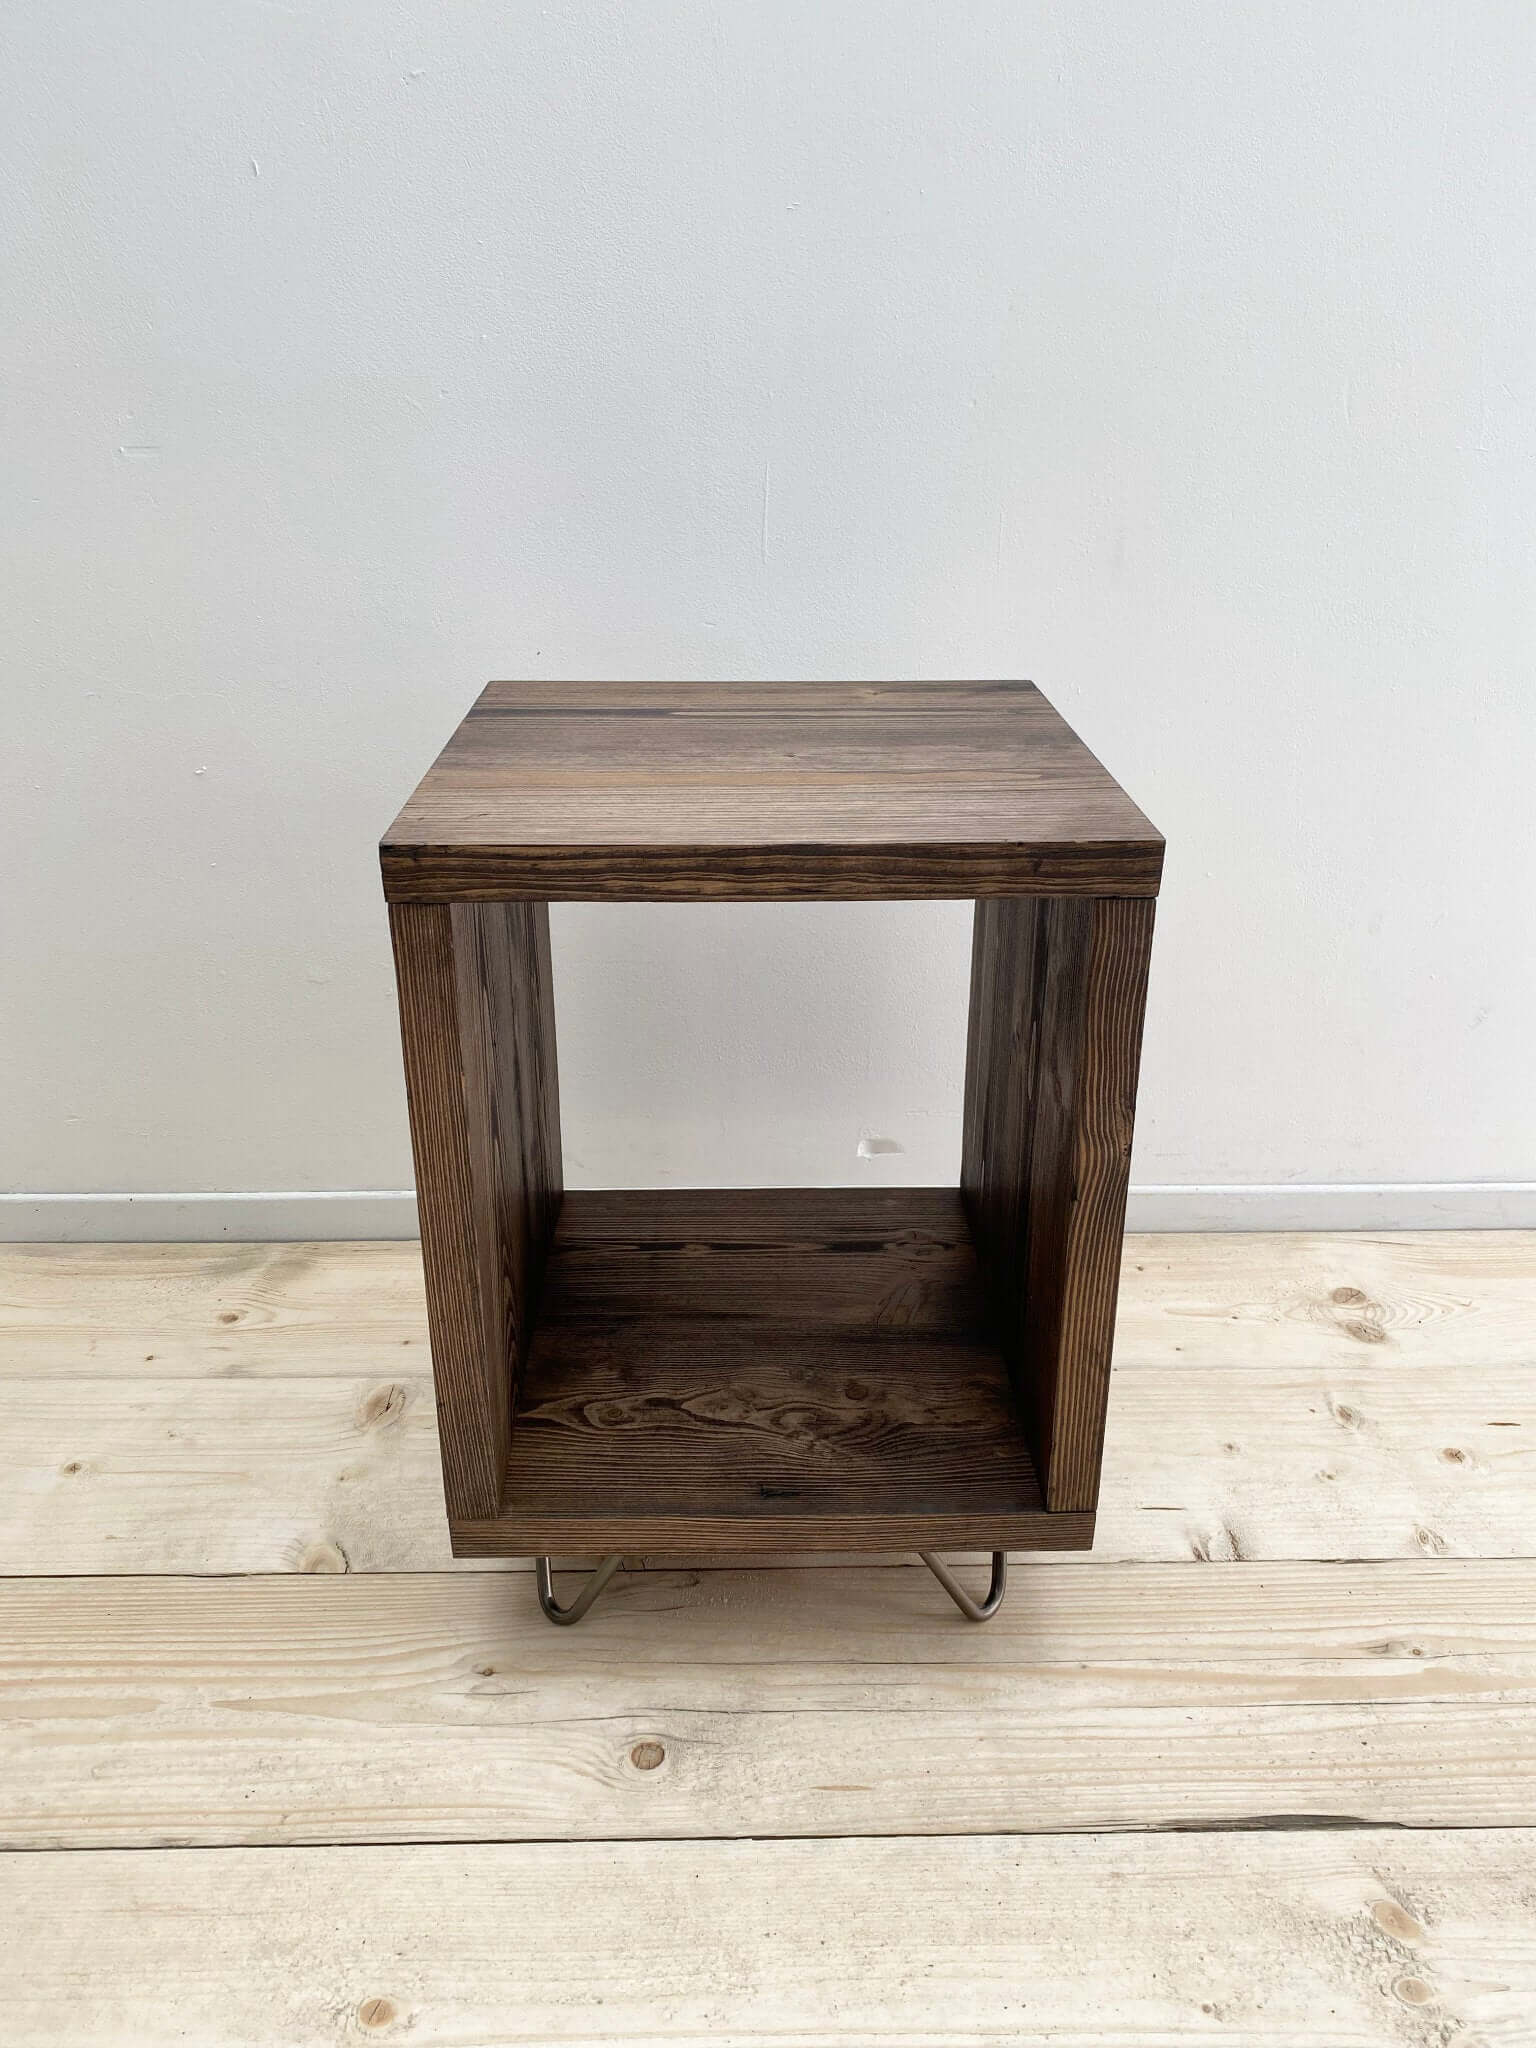 Reclaimed wood side table cube with hairpin legs.